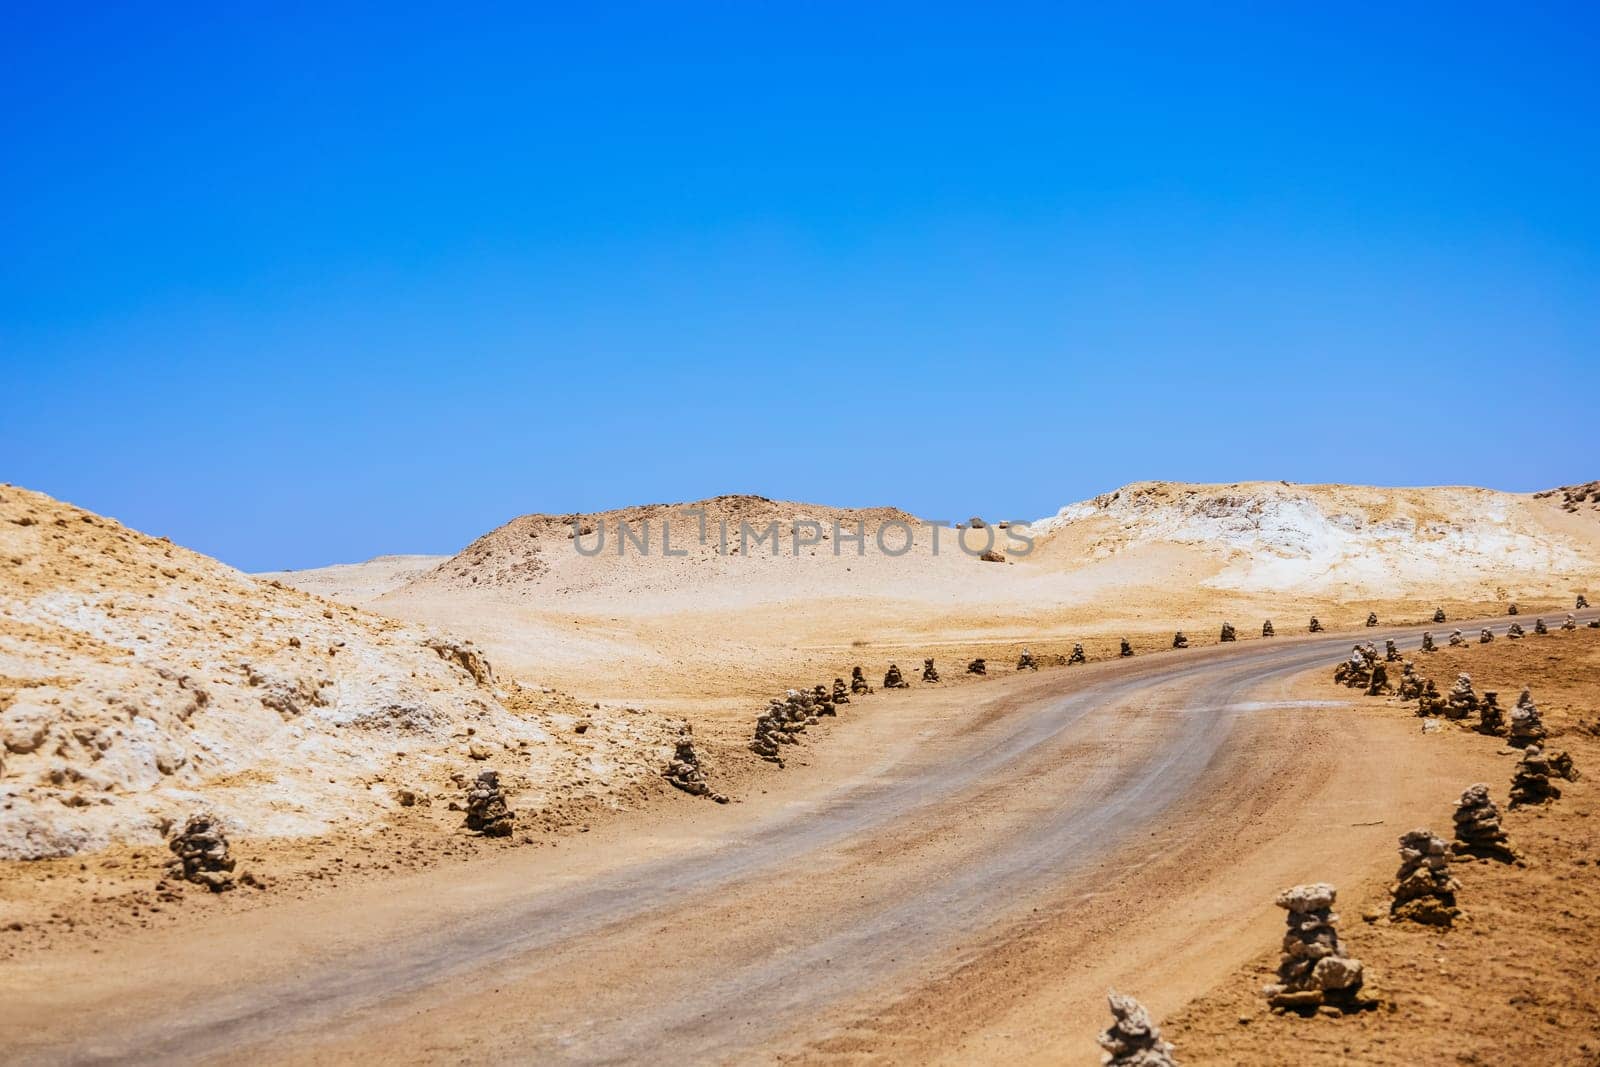 Driveway in Ras Mohamed National Park. Ras Muhammad in Egypt at the southern extreme of the Sinai Peninsula. The road in desert